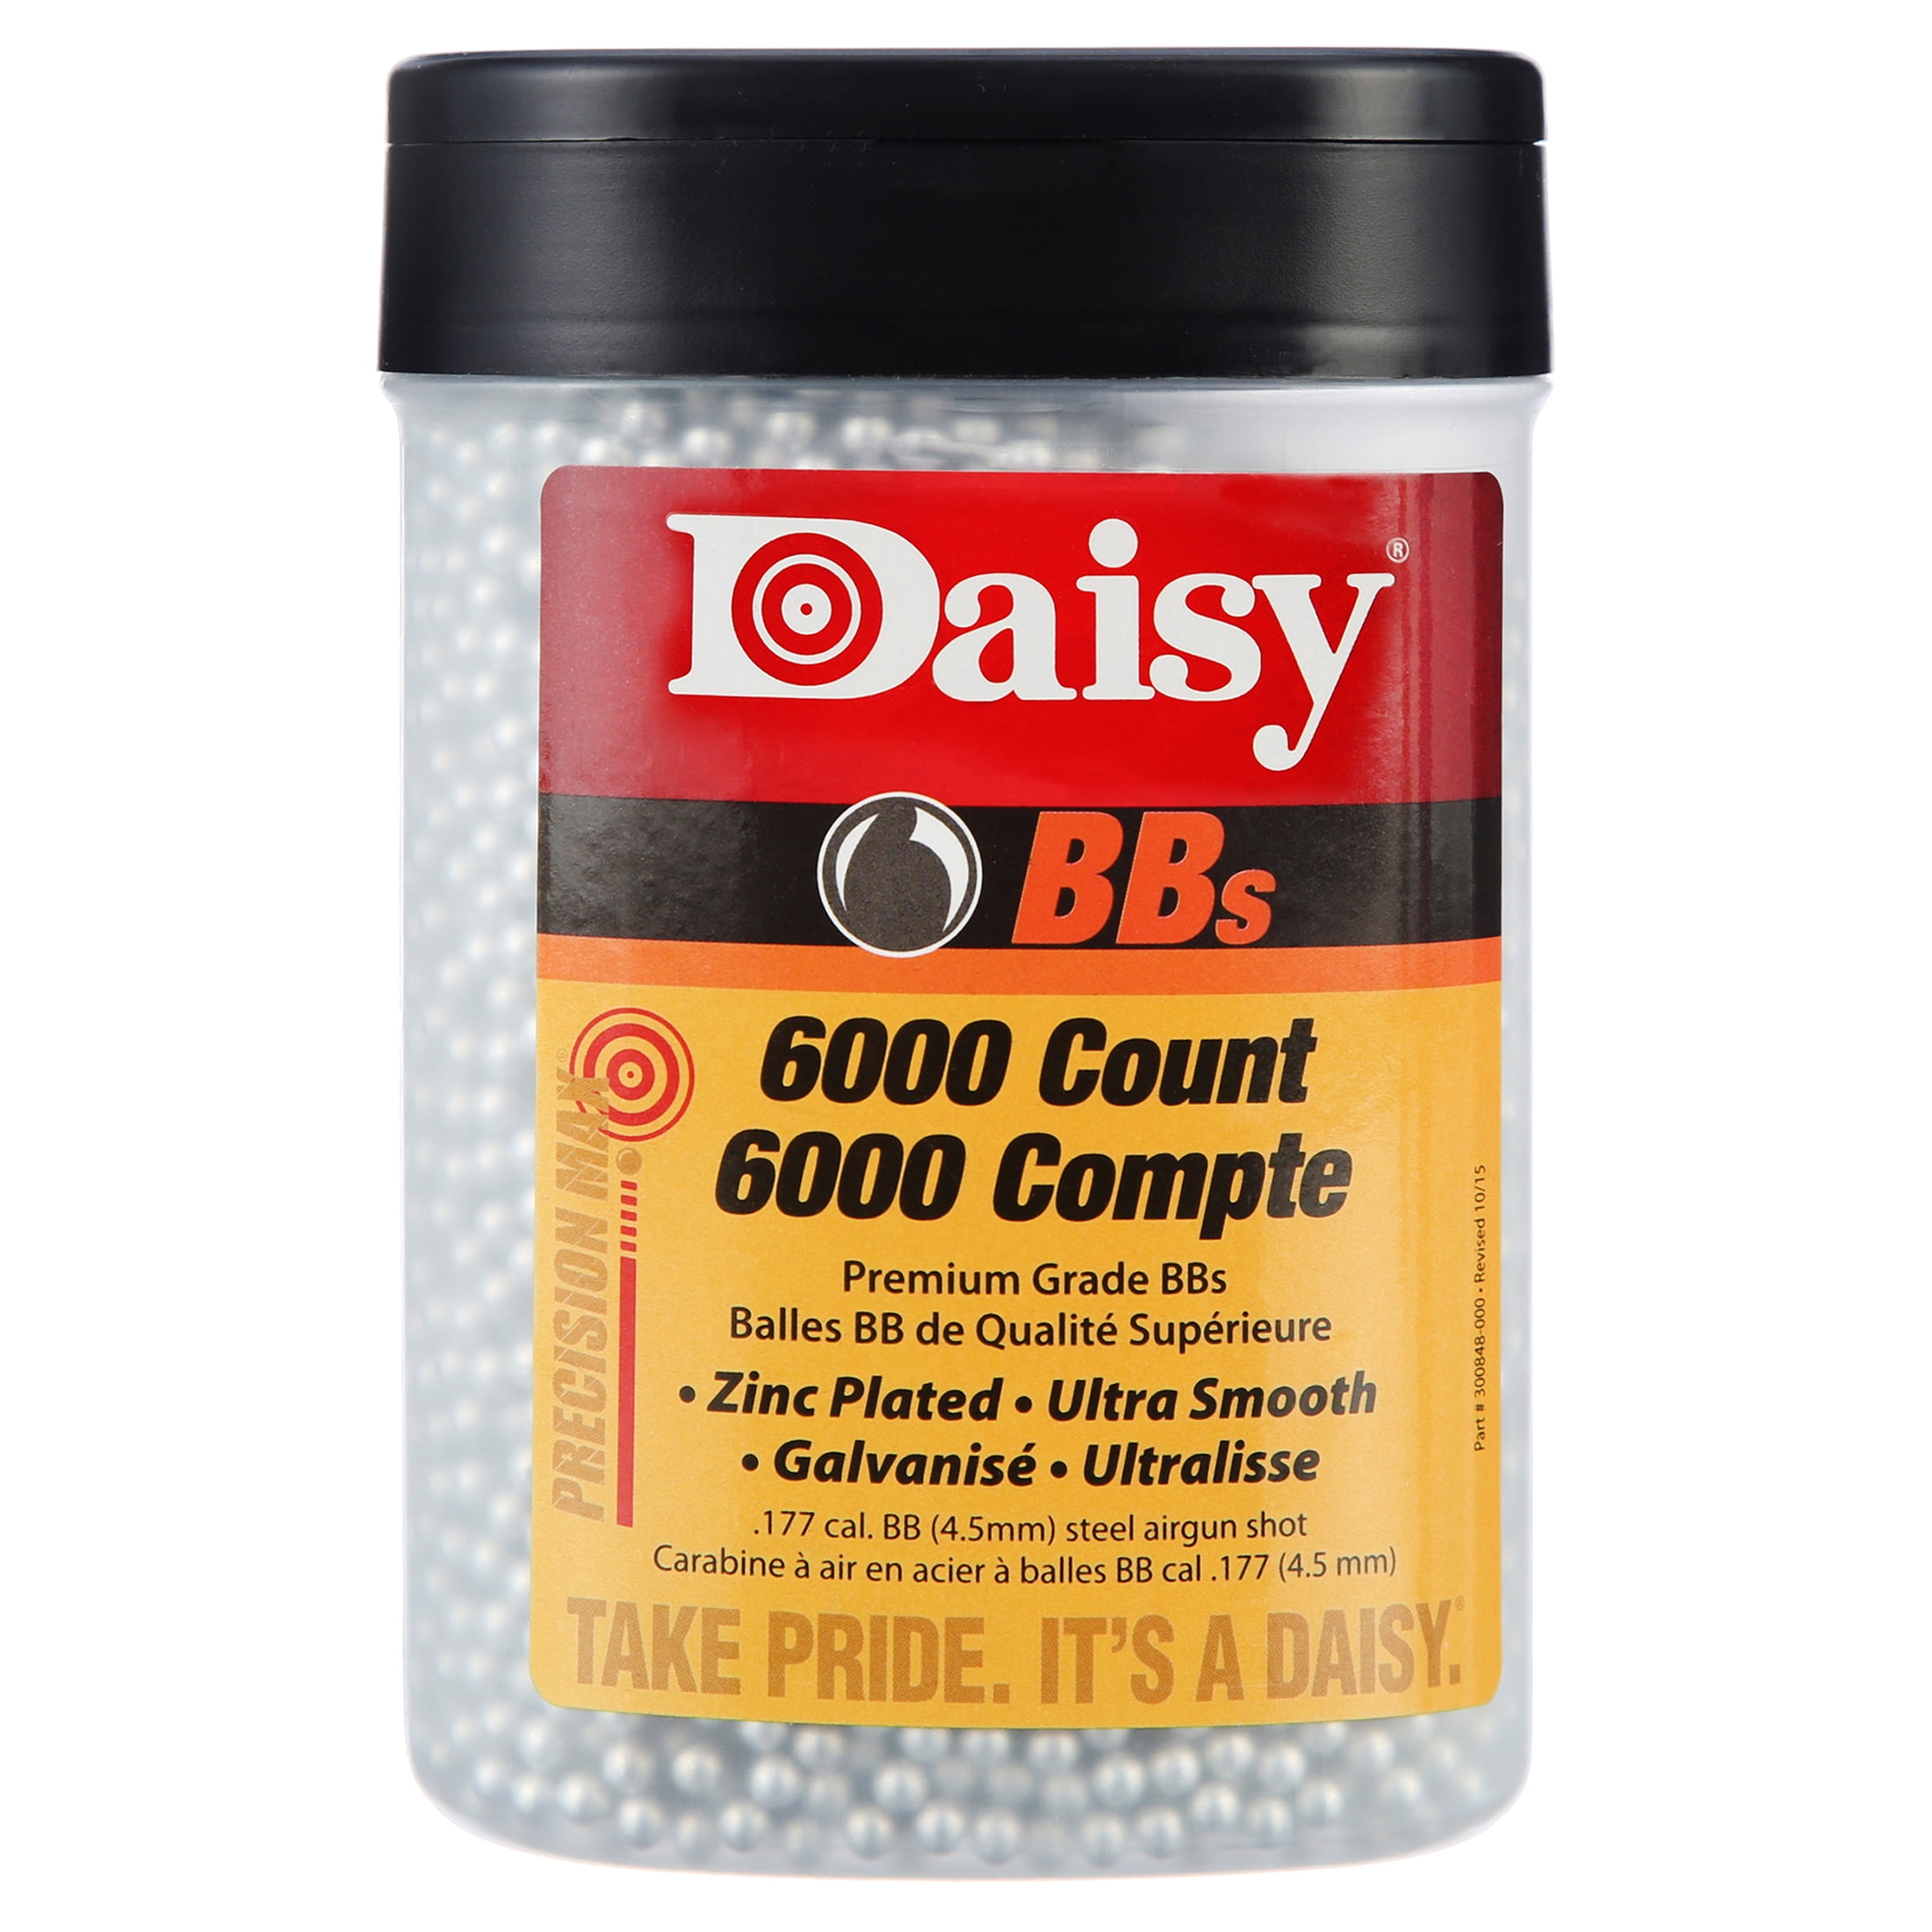 Daisy 60 PrecisionMax BBS .177 BB Zinc-plated Steel 6000 for sale online